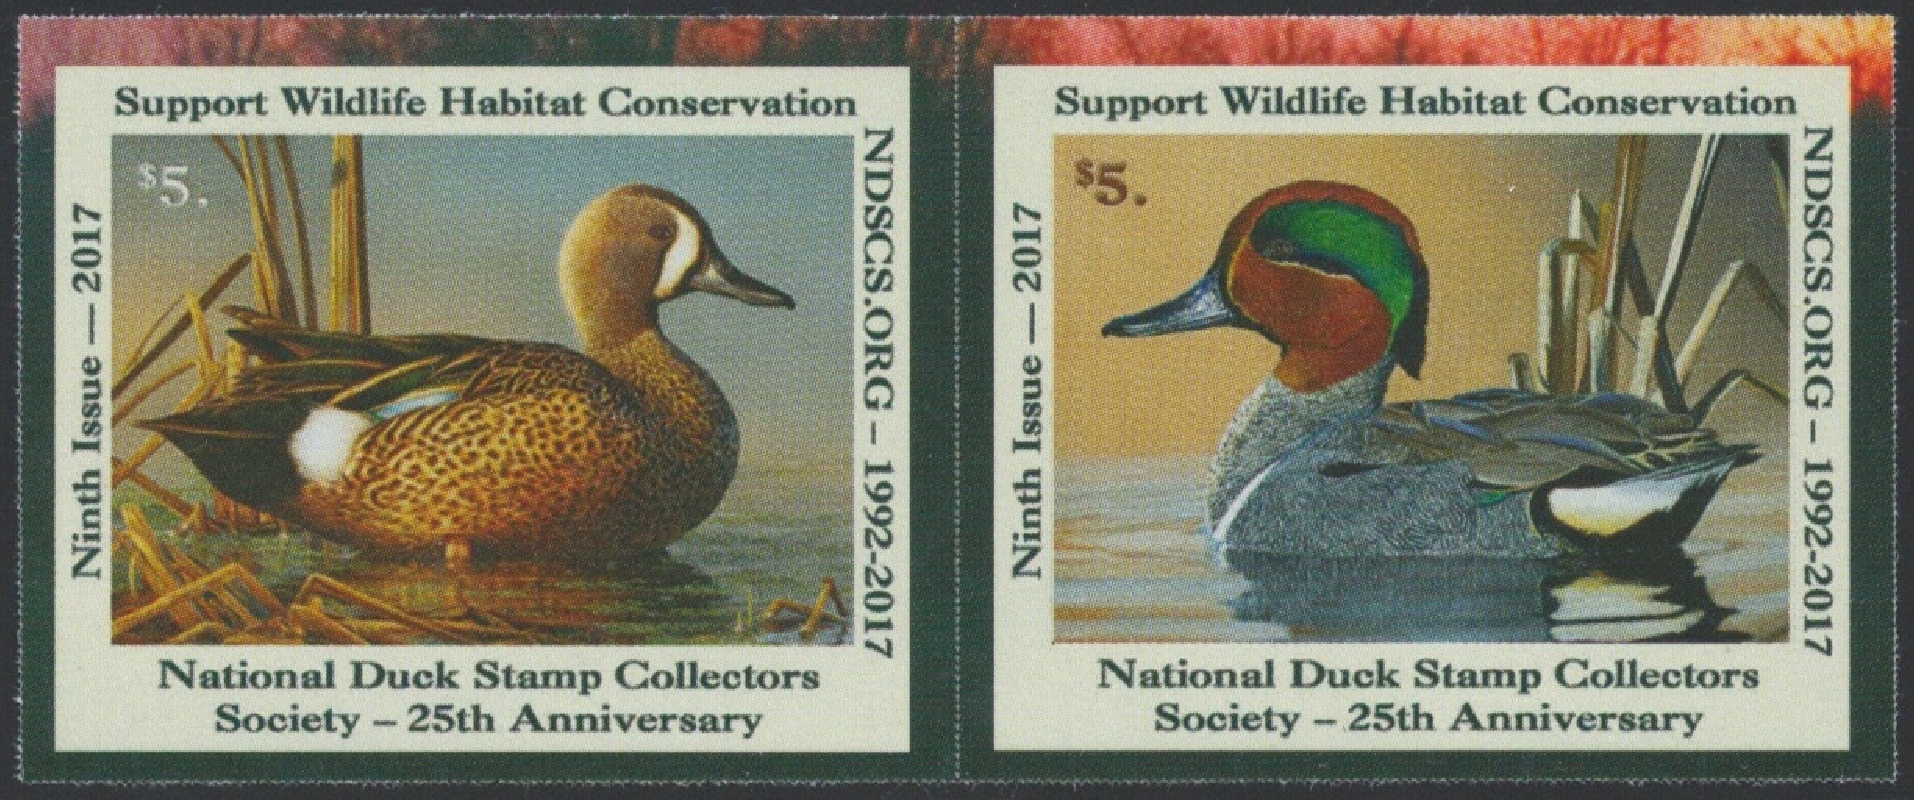 2017 NDSC Stamp (blue-winged and green-winged teals)